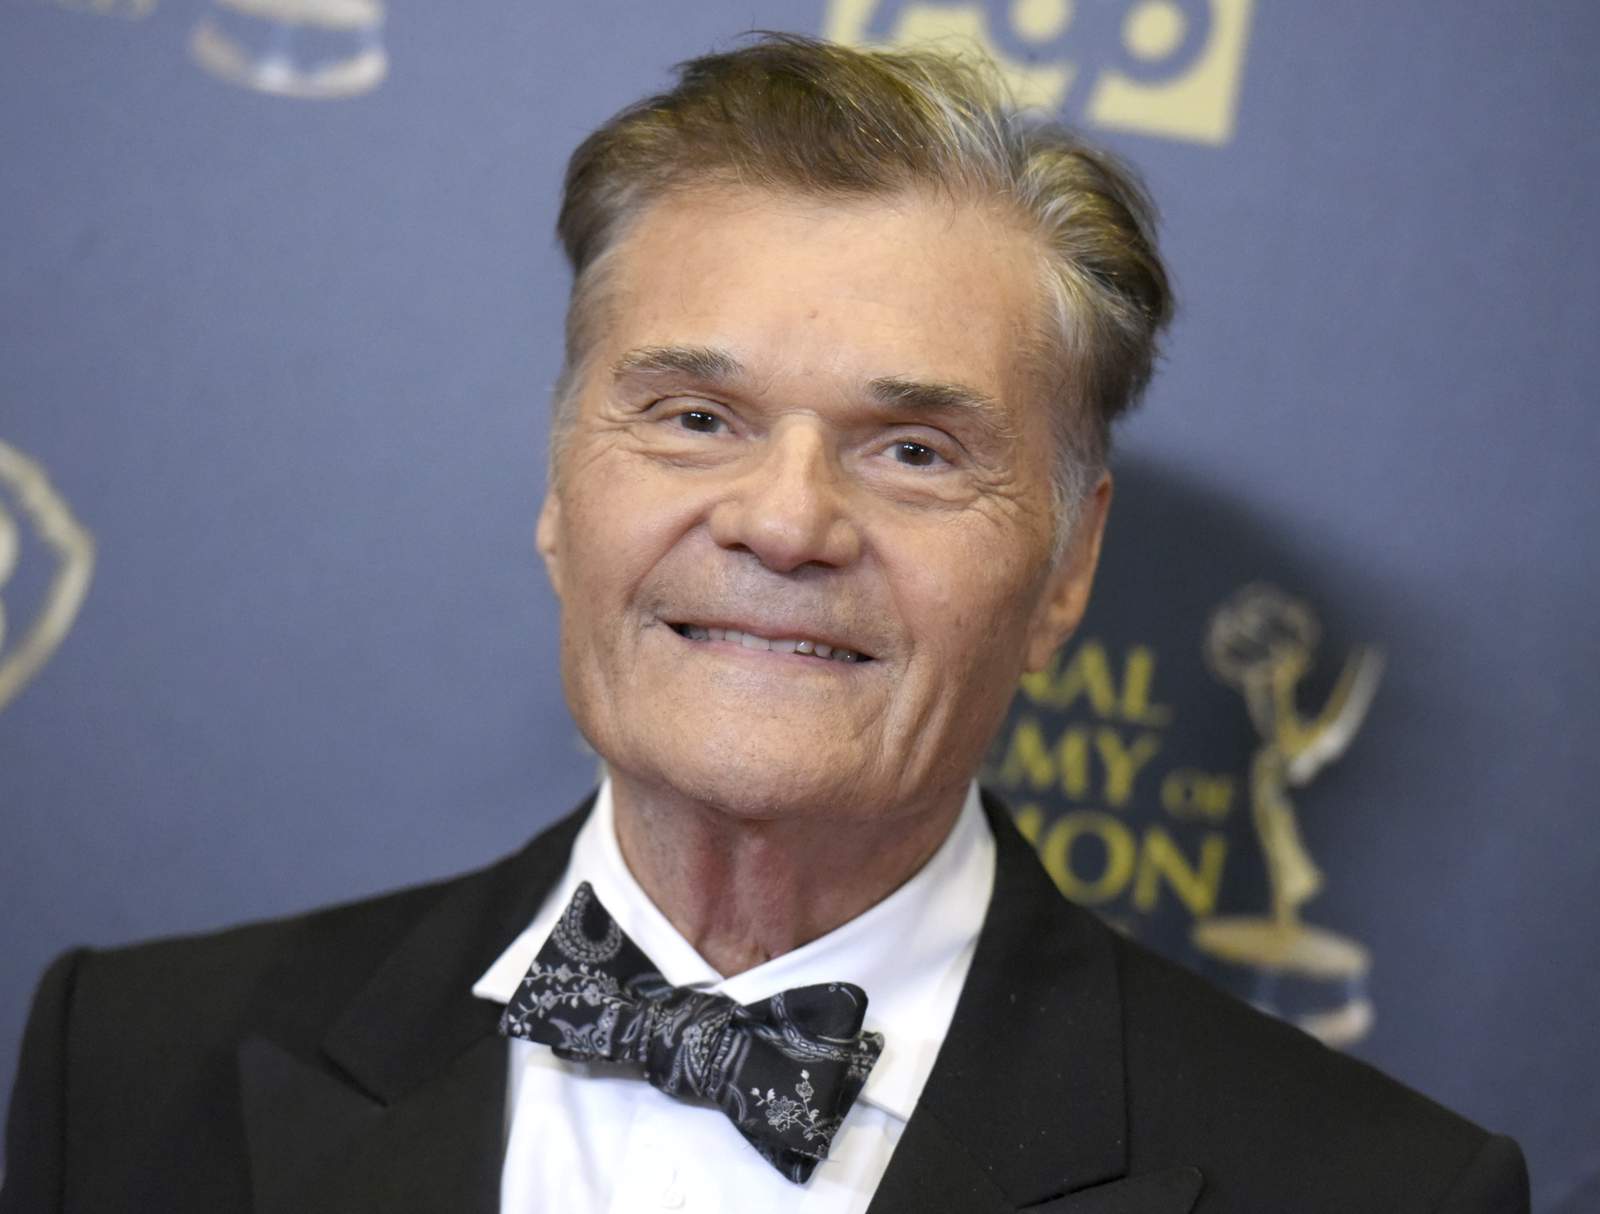 Fred Willard, the comedic improv-style actor, has died at 86